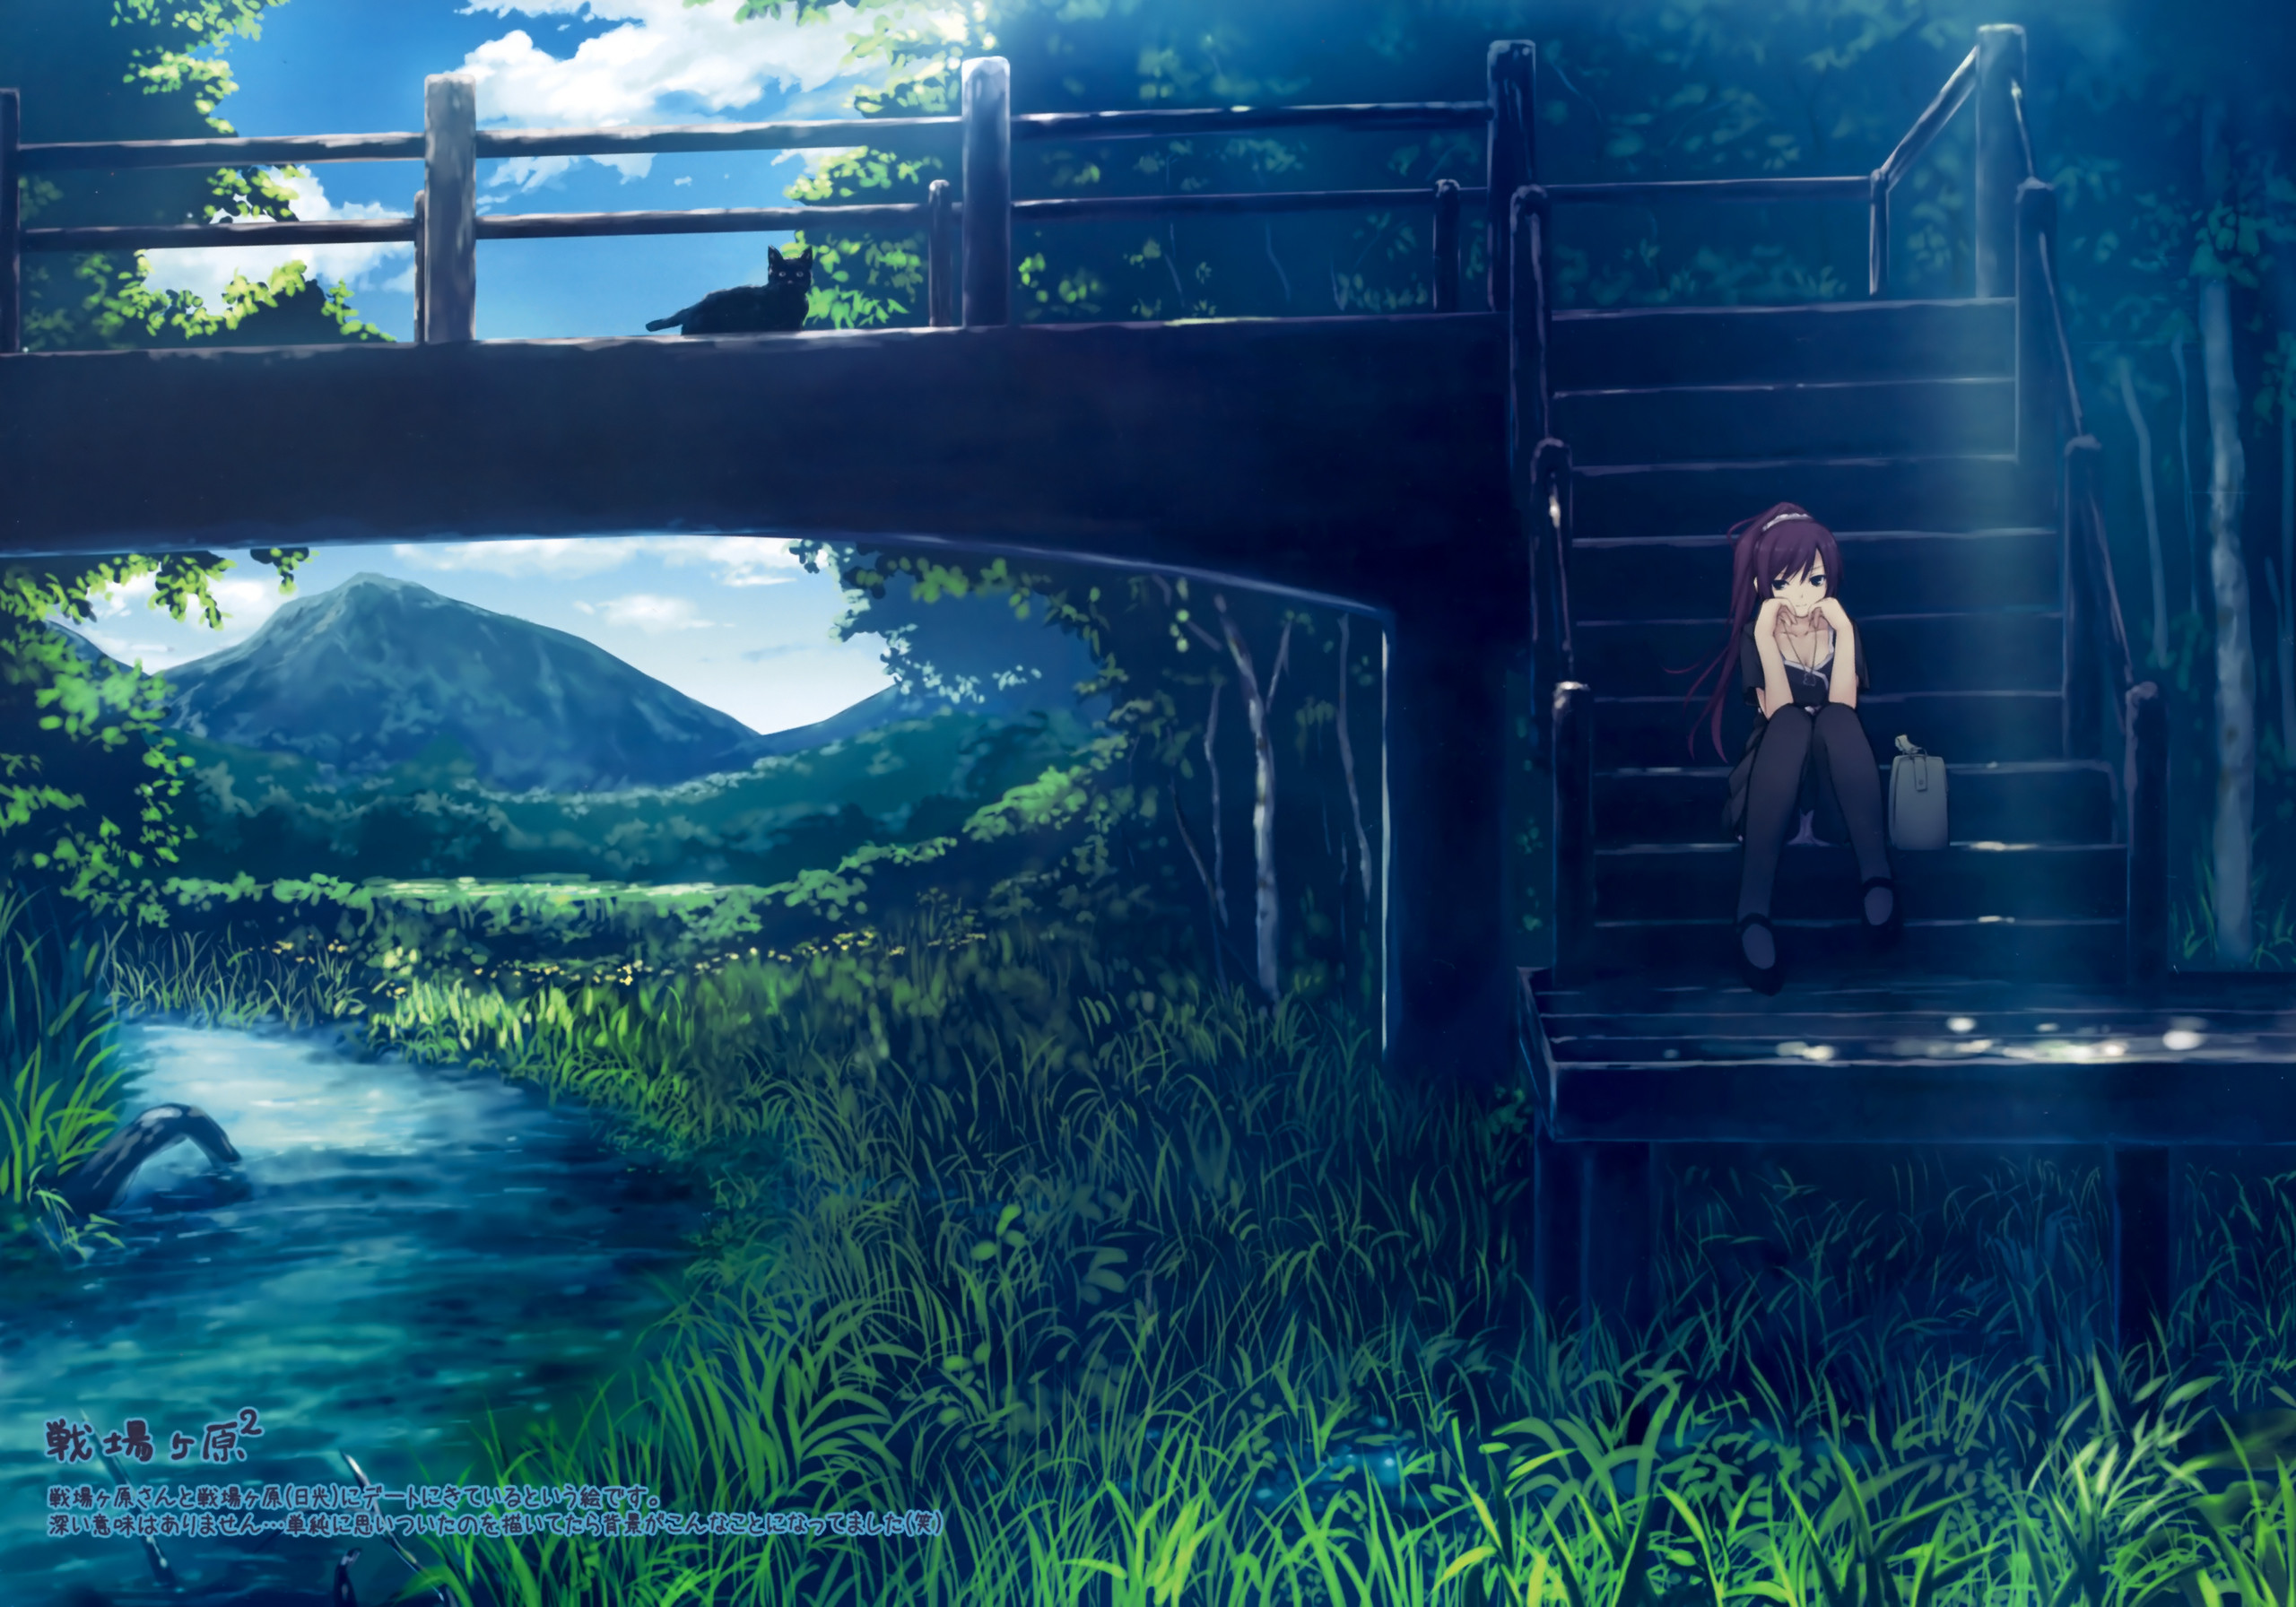 Wallpaper Anime Landscape Anime Art Theatrical Scenery Landscape  Background  Download Free Image